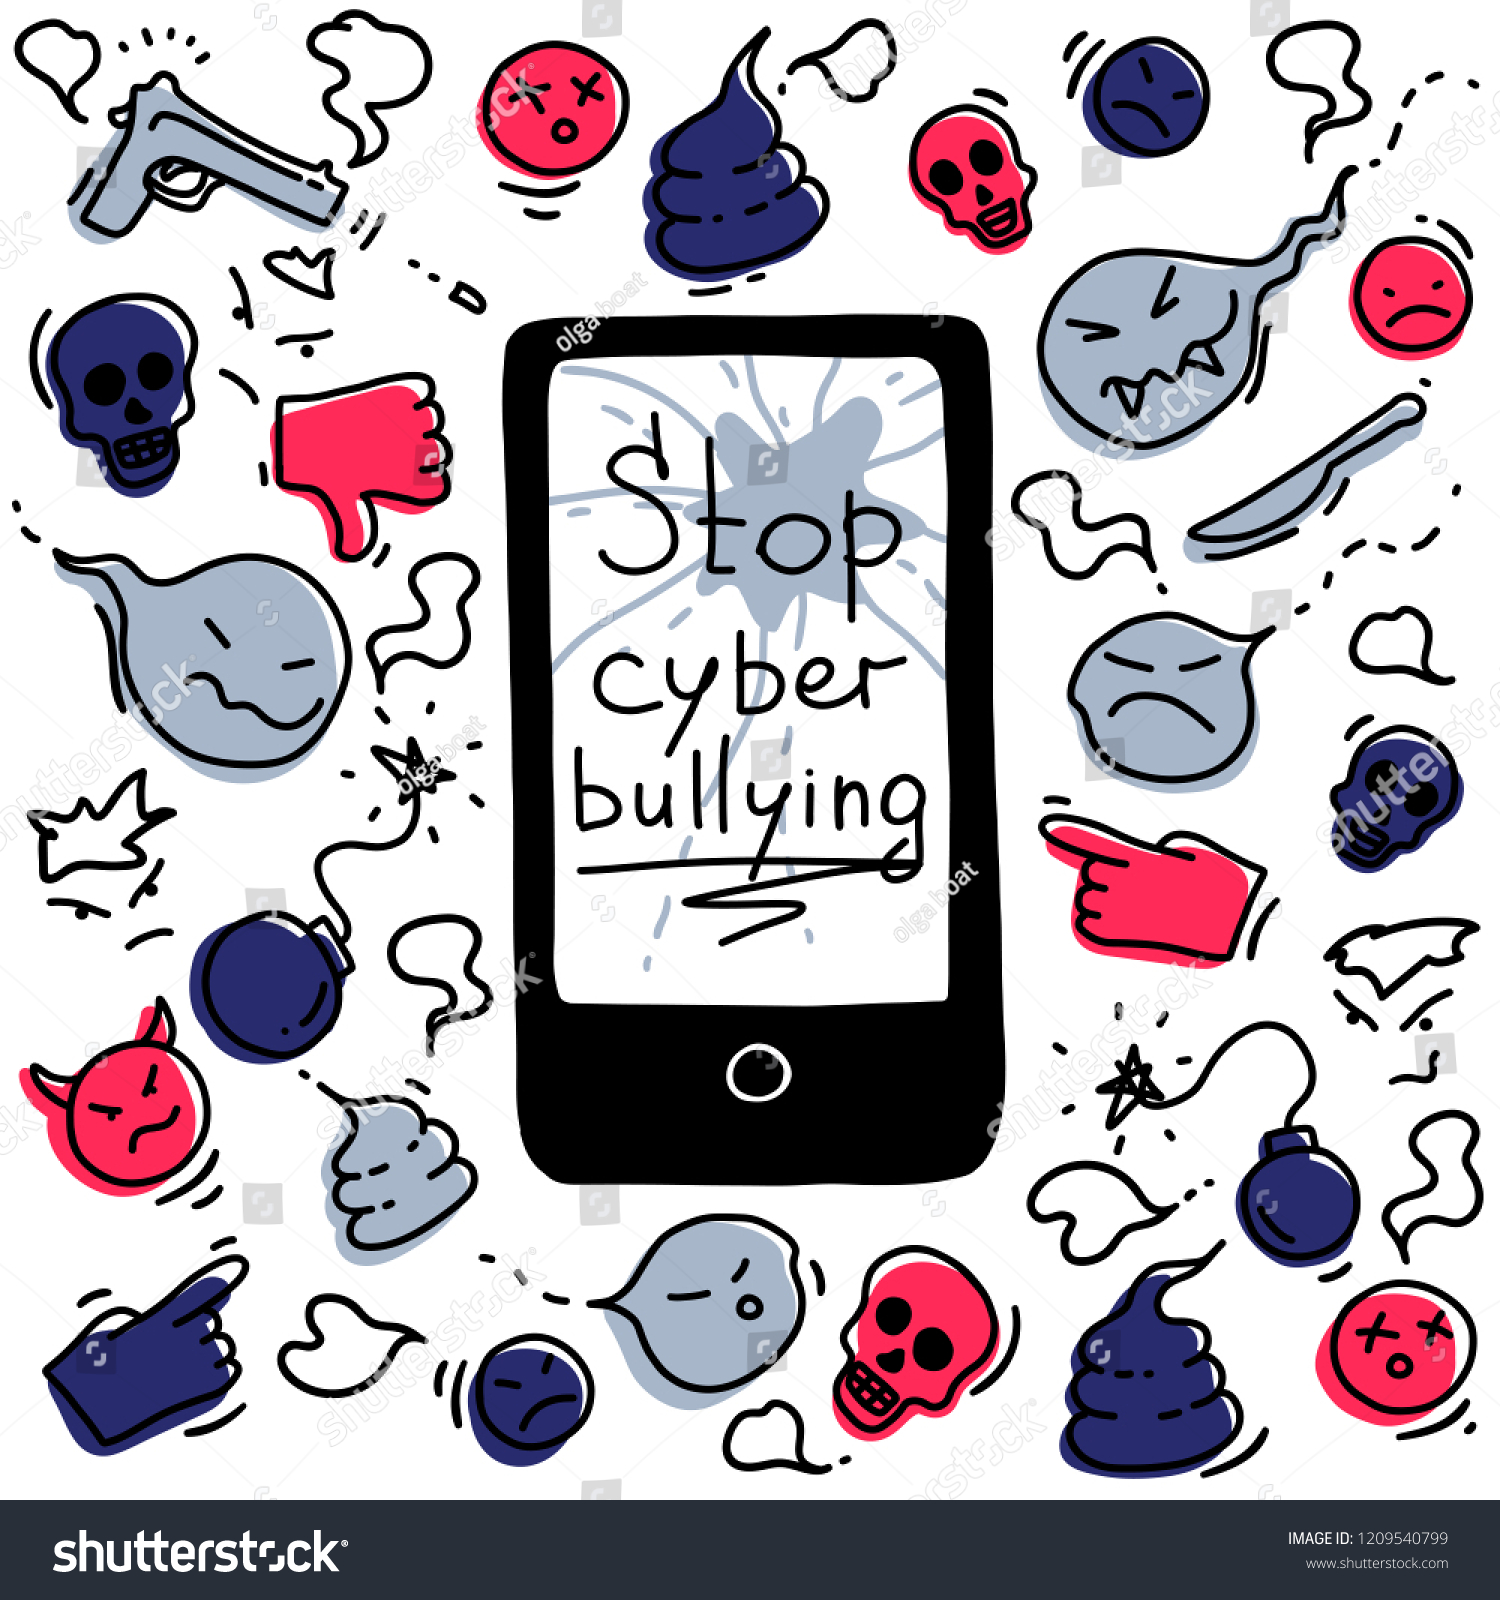 Concept Cyberbullying Through Internet Come Unfriendly Stock Vector Royalty Free 1209540799 1506